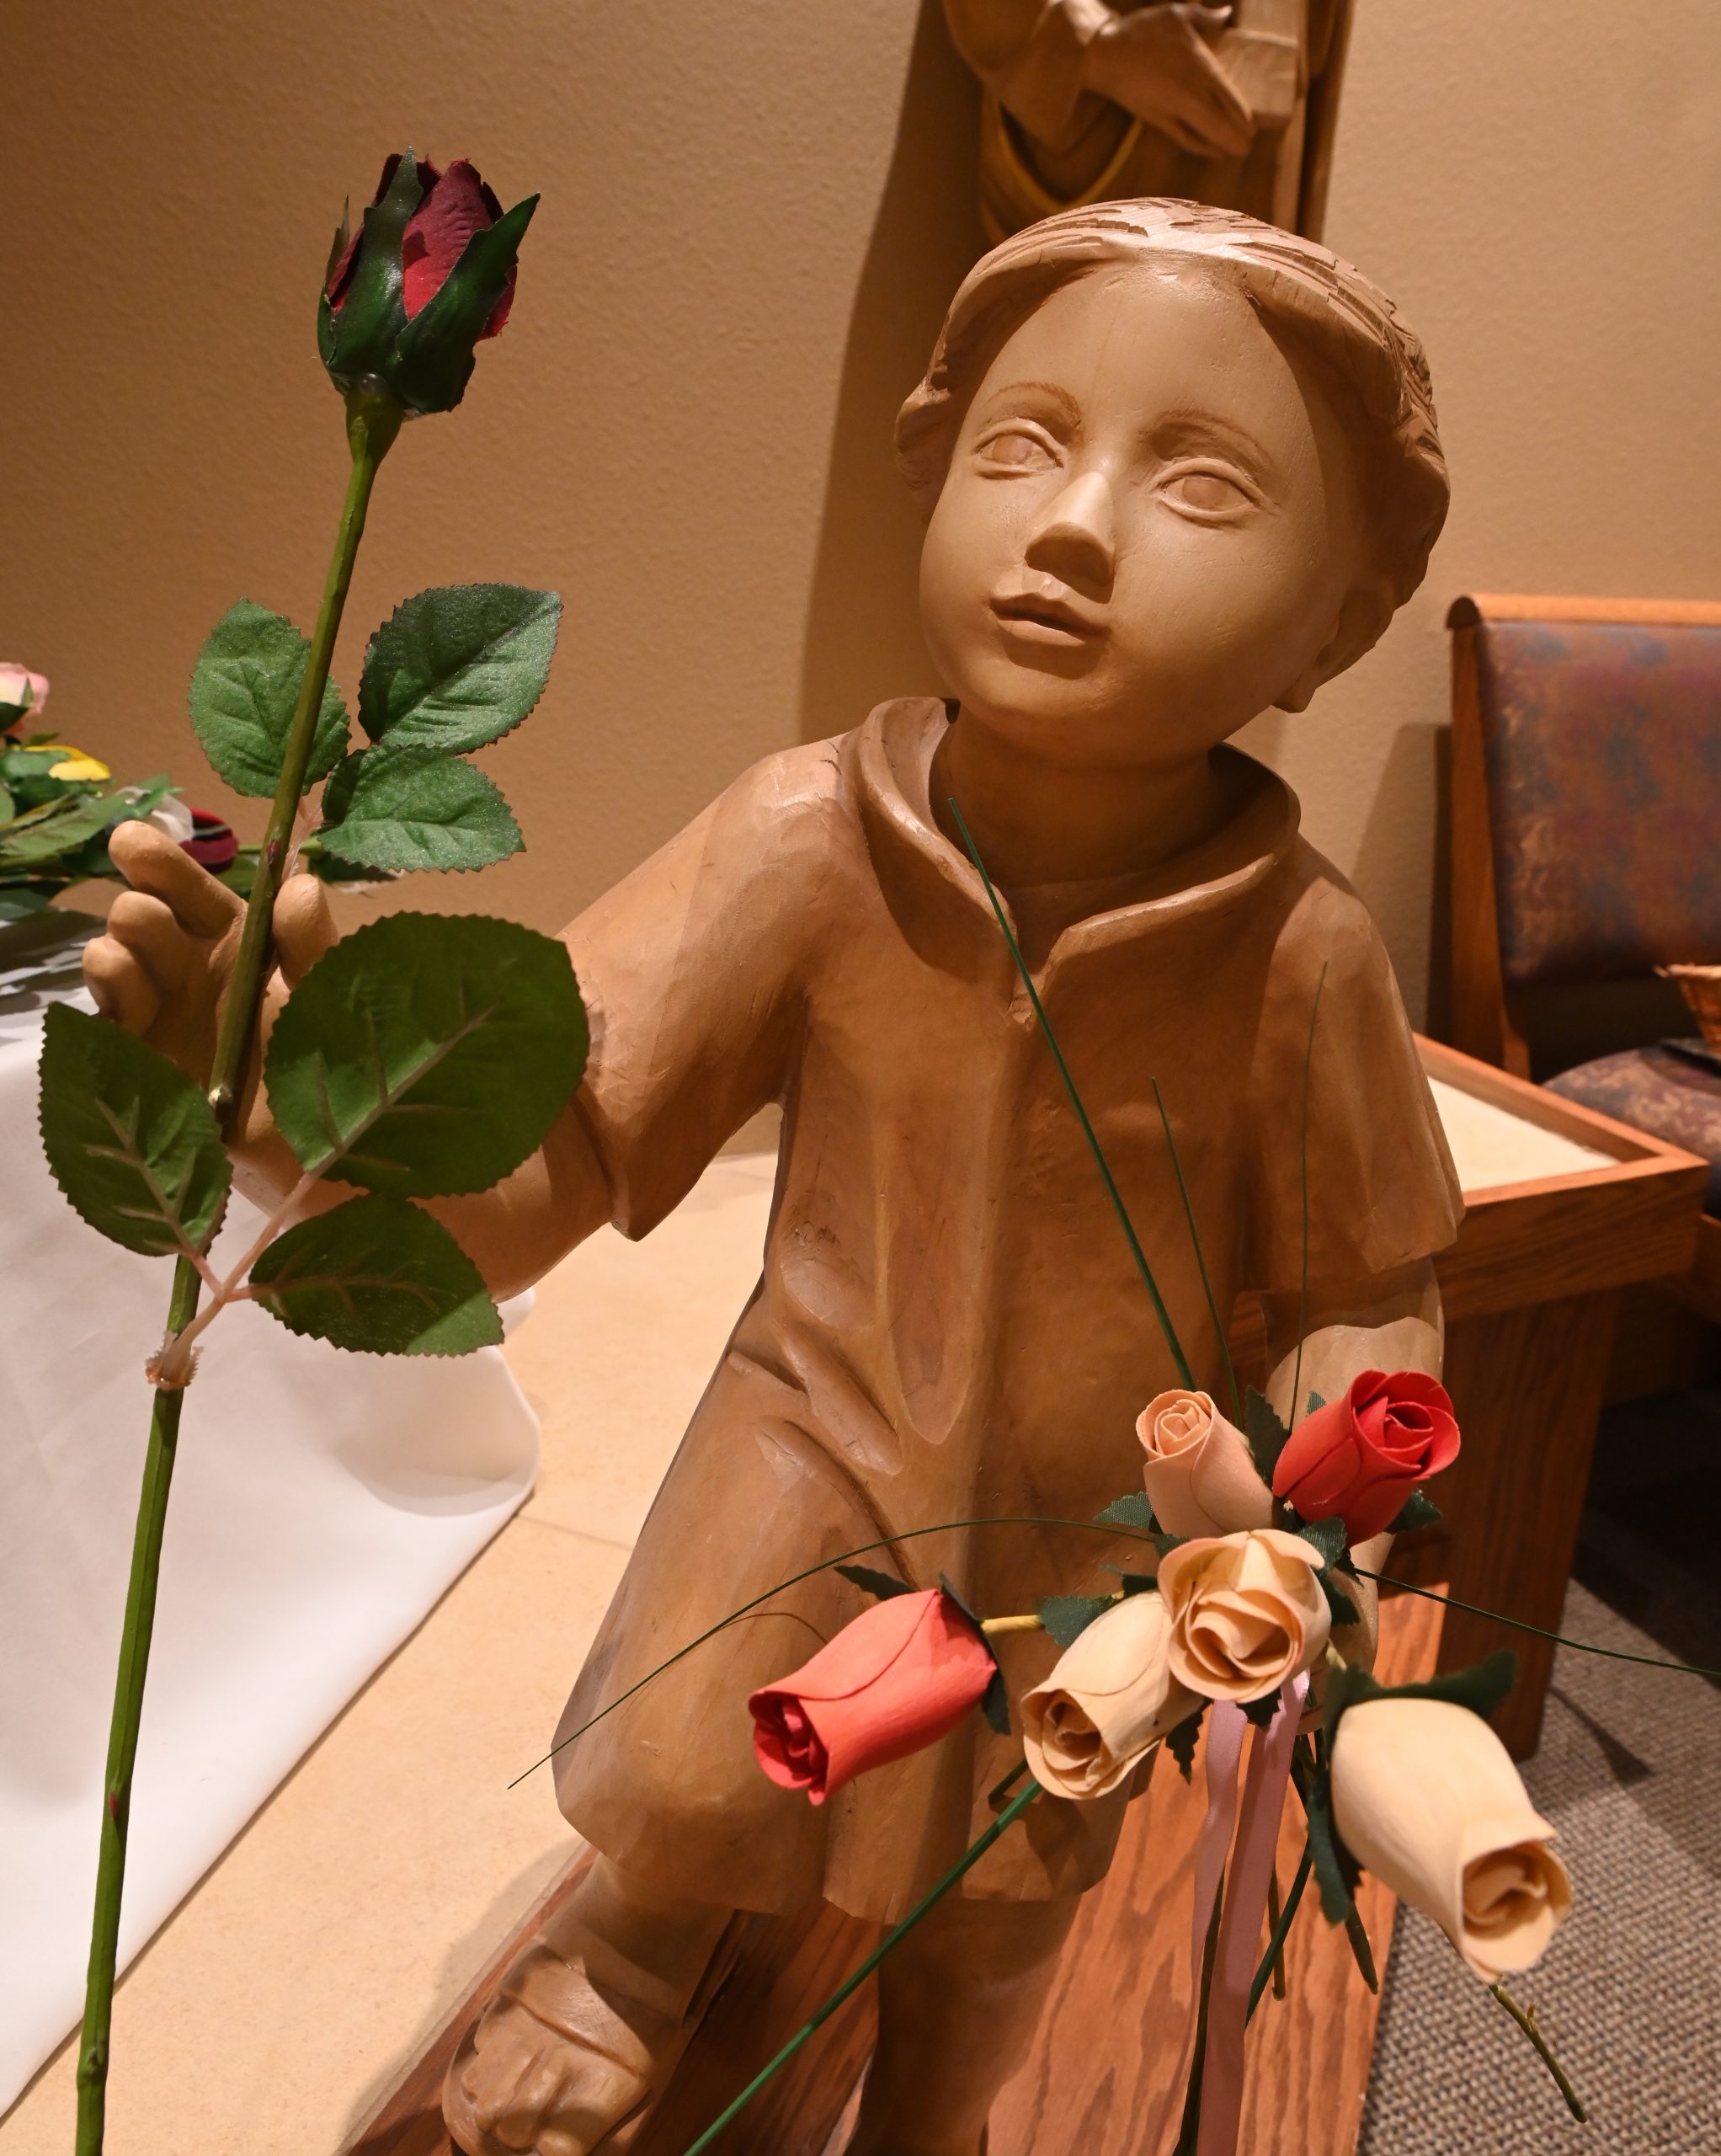 State of a child holds roses.